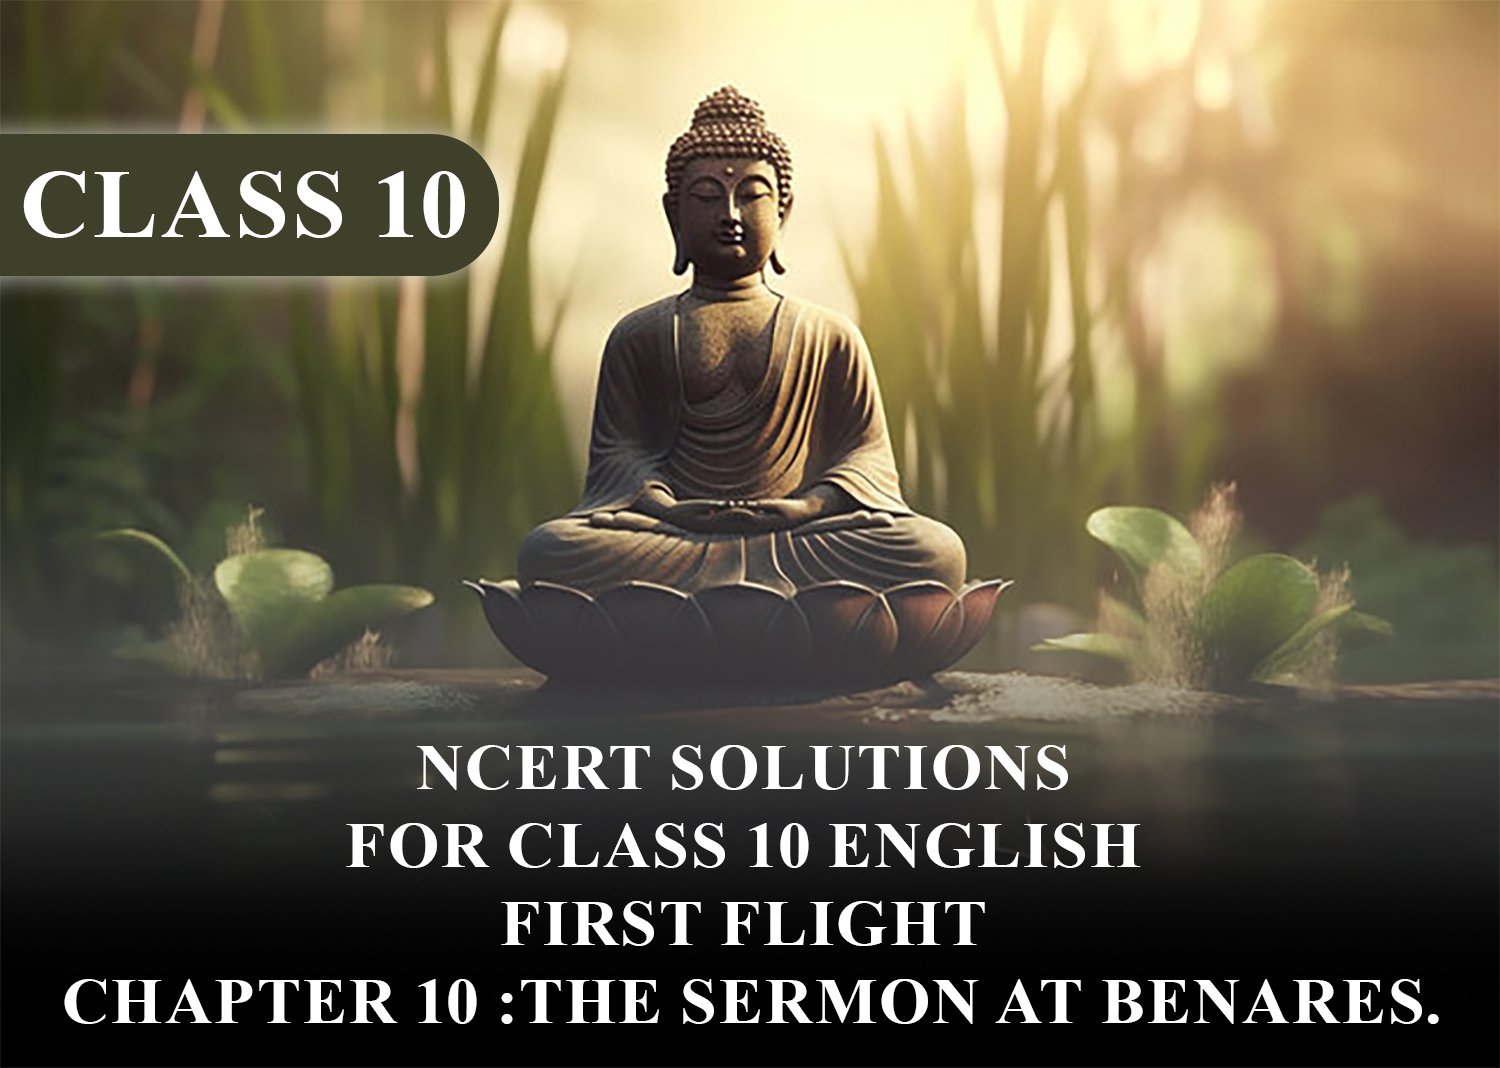 NCERT Solutions for Class 10 English First Flight Chapter 10 The Sermon at Benares.